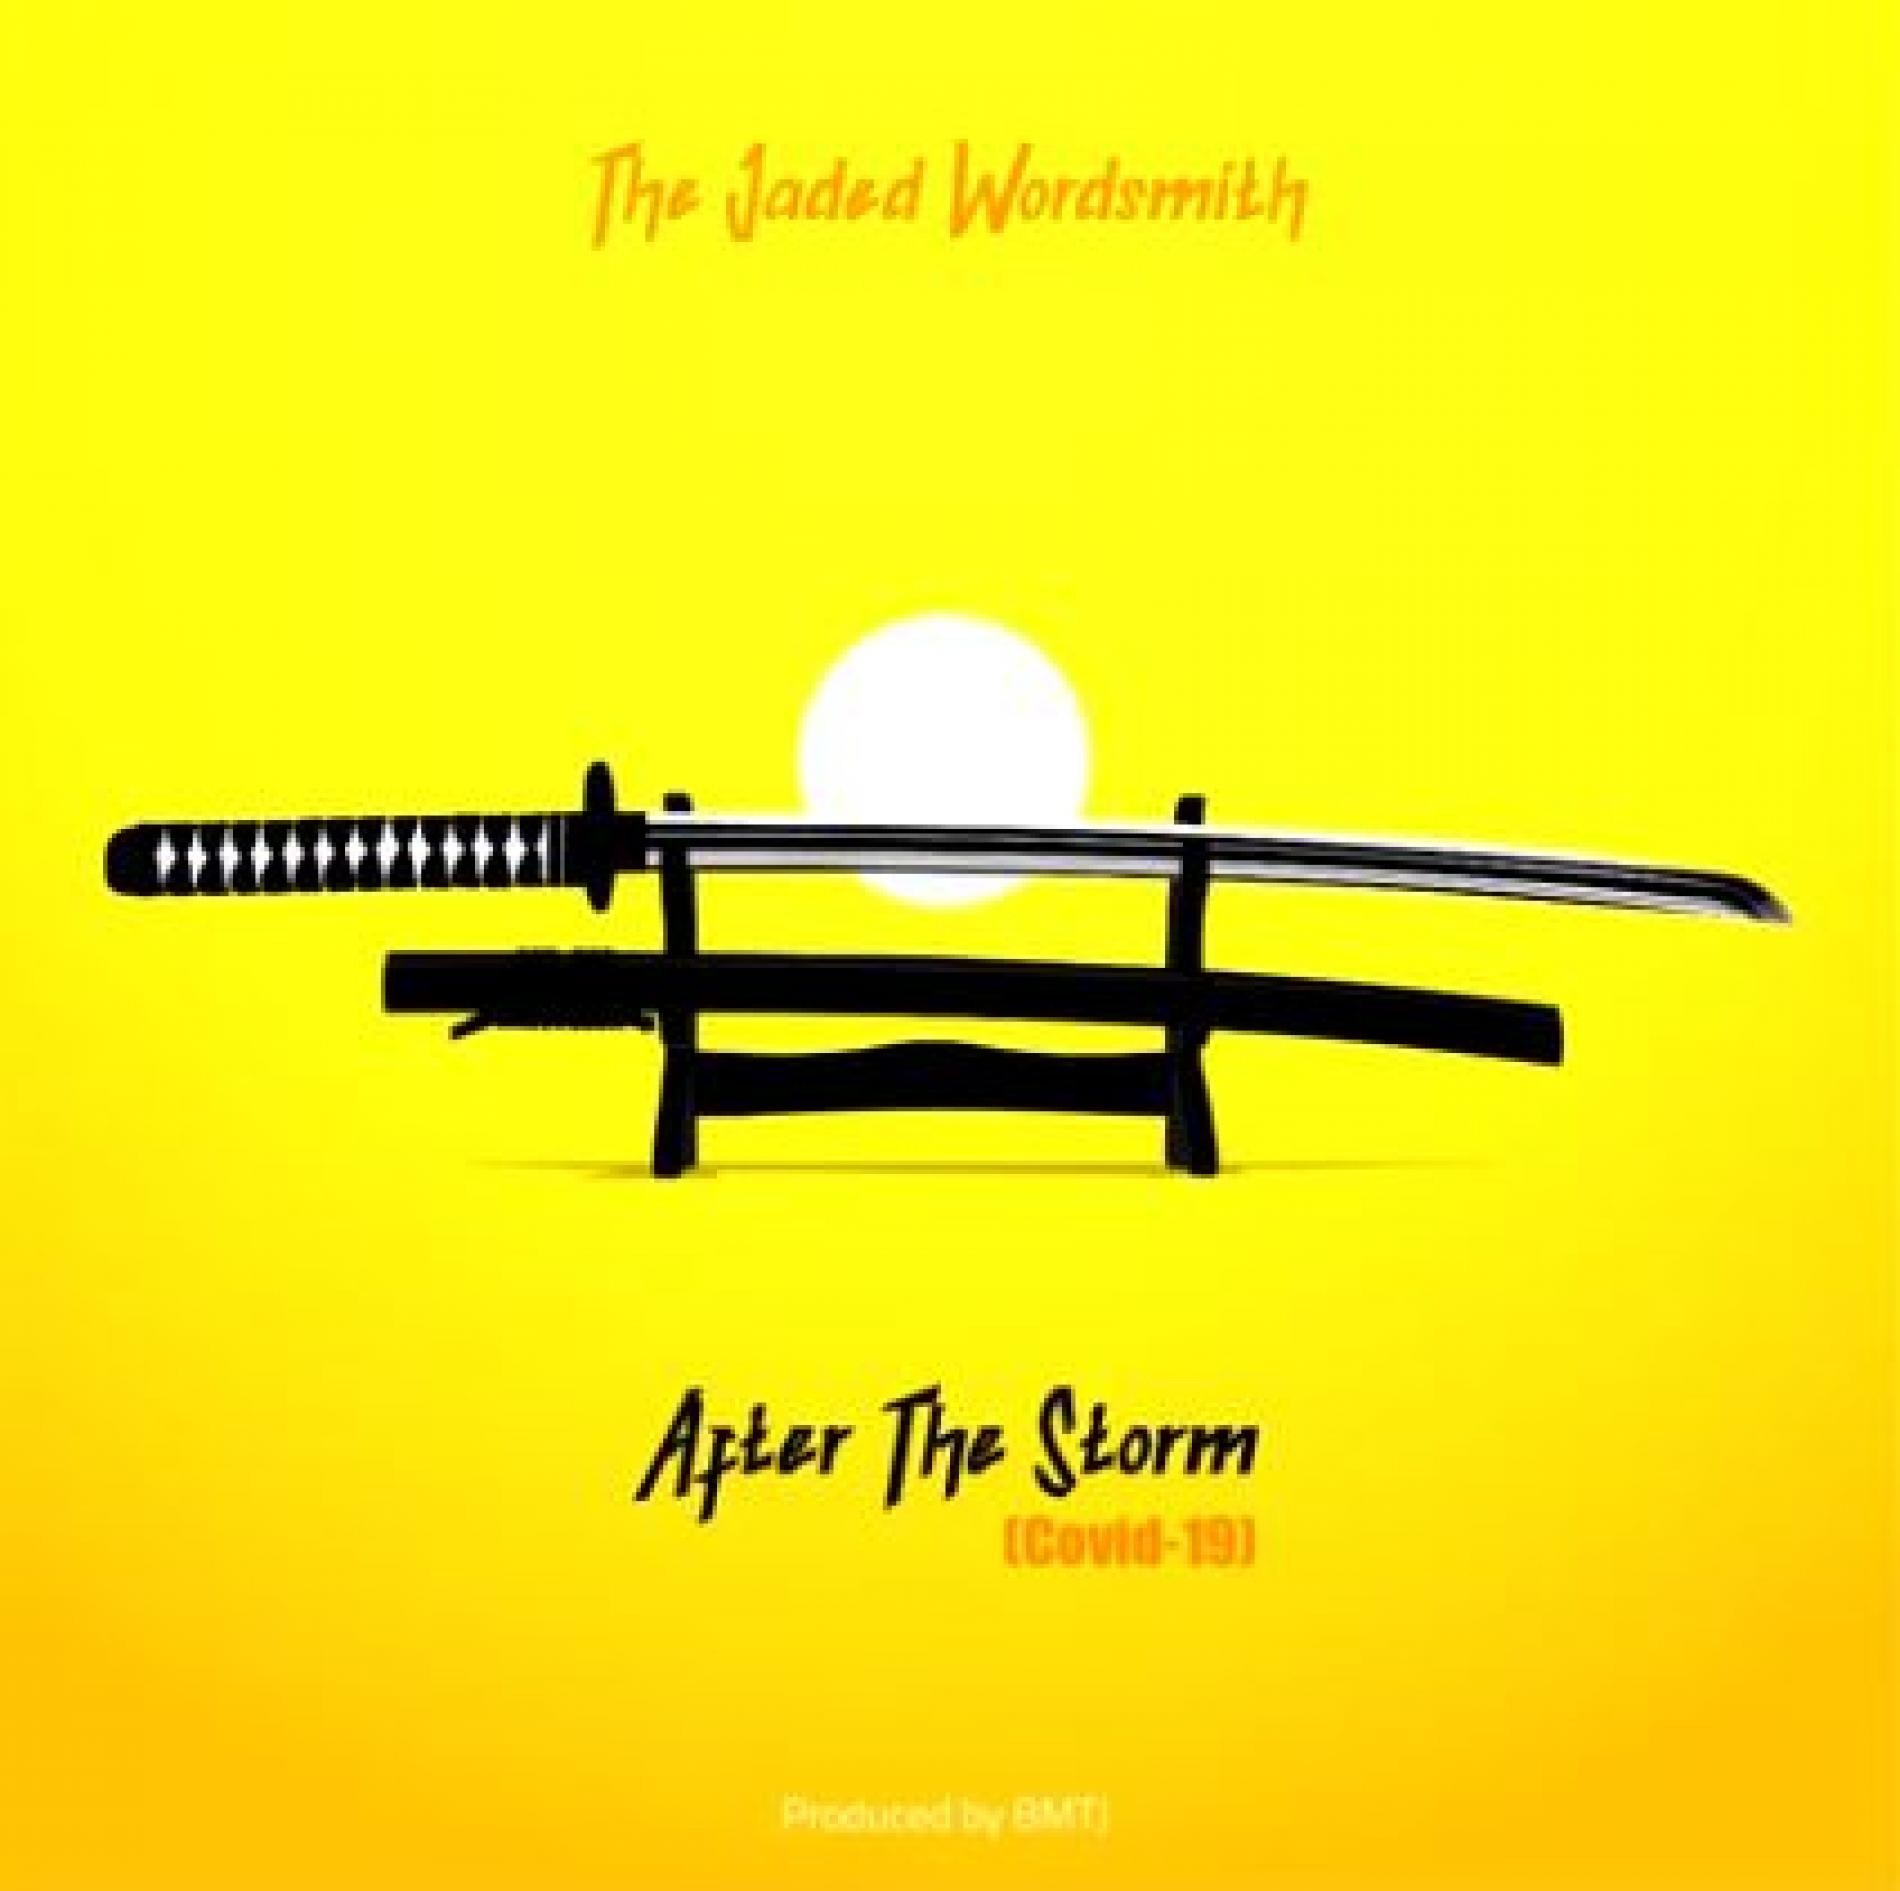 The Jaded Wordsmith – After The Storm (COVID-19)